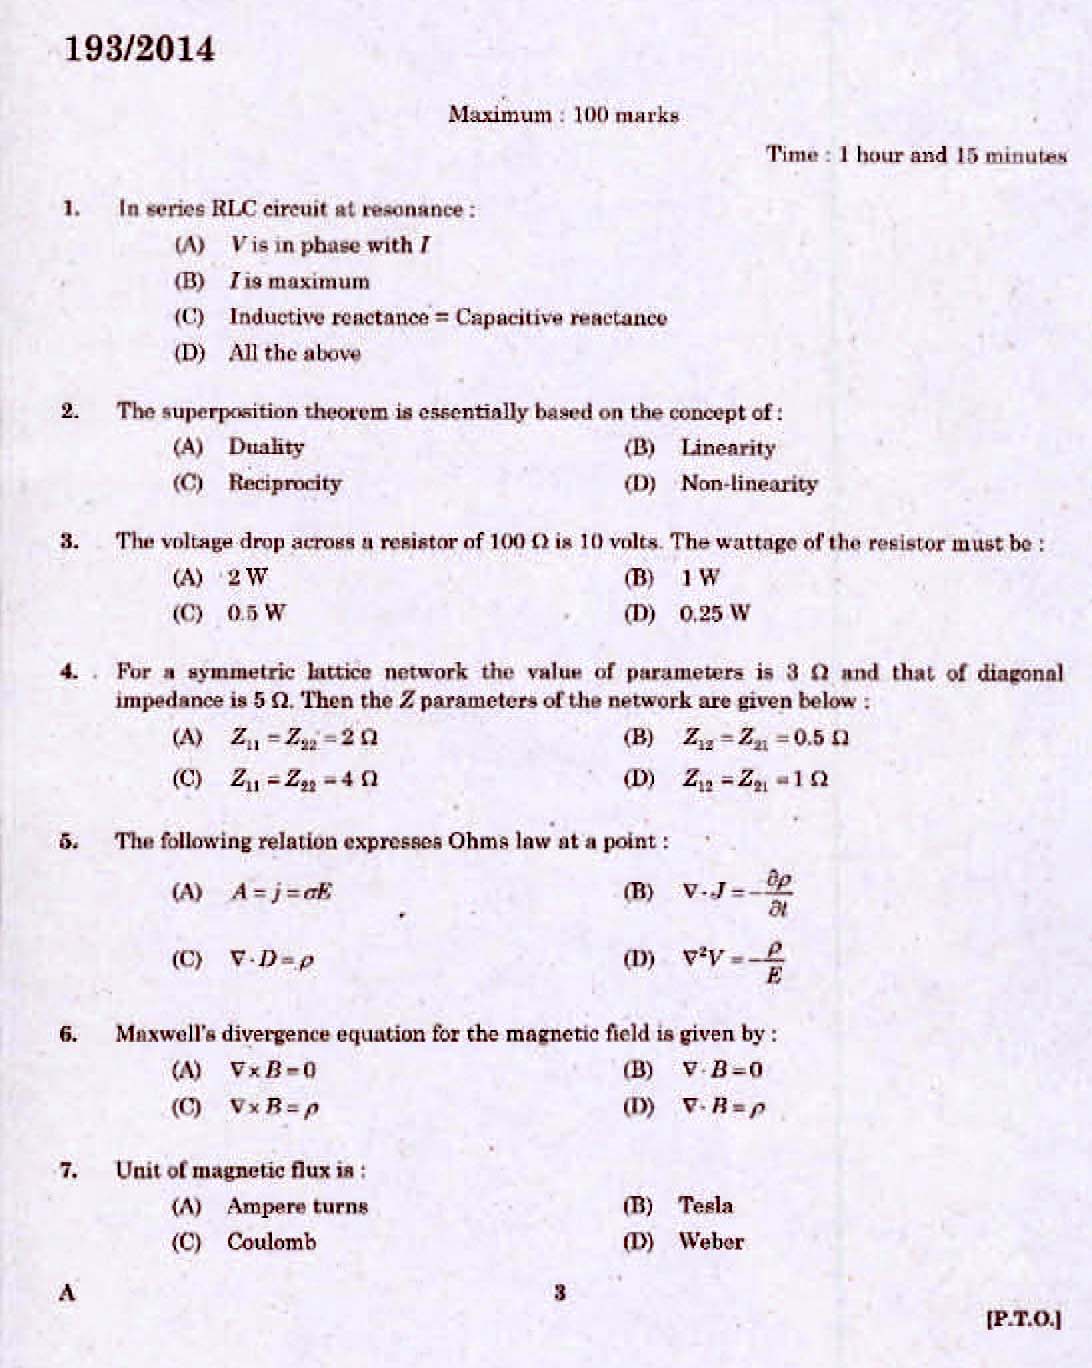 Kerala PSC Assistant Engineer Electrical Exam 2014 Question Paper Code 1932014 1